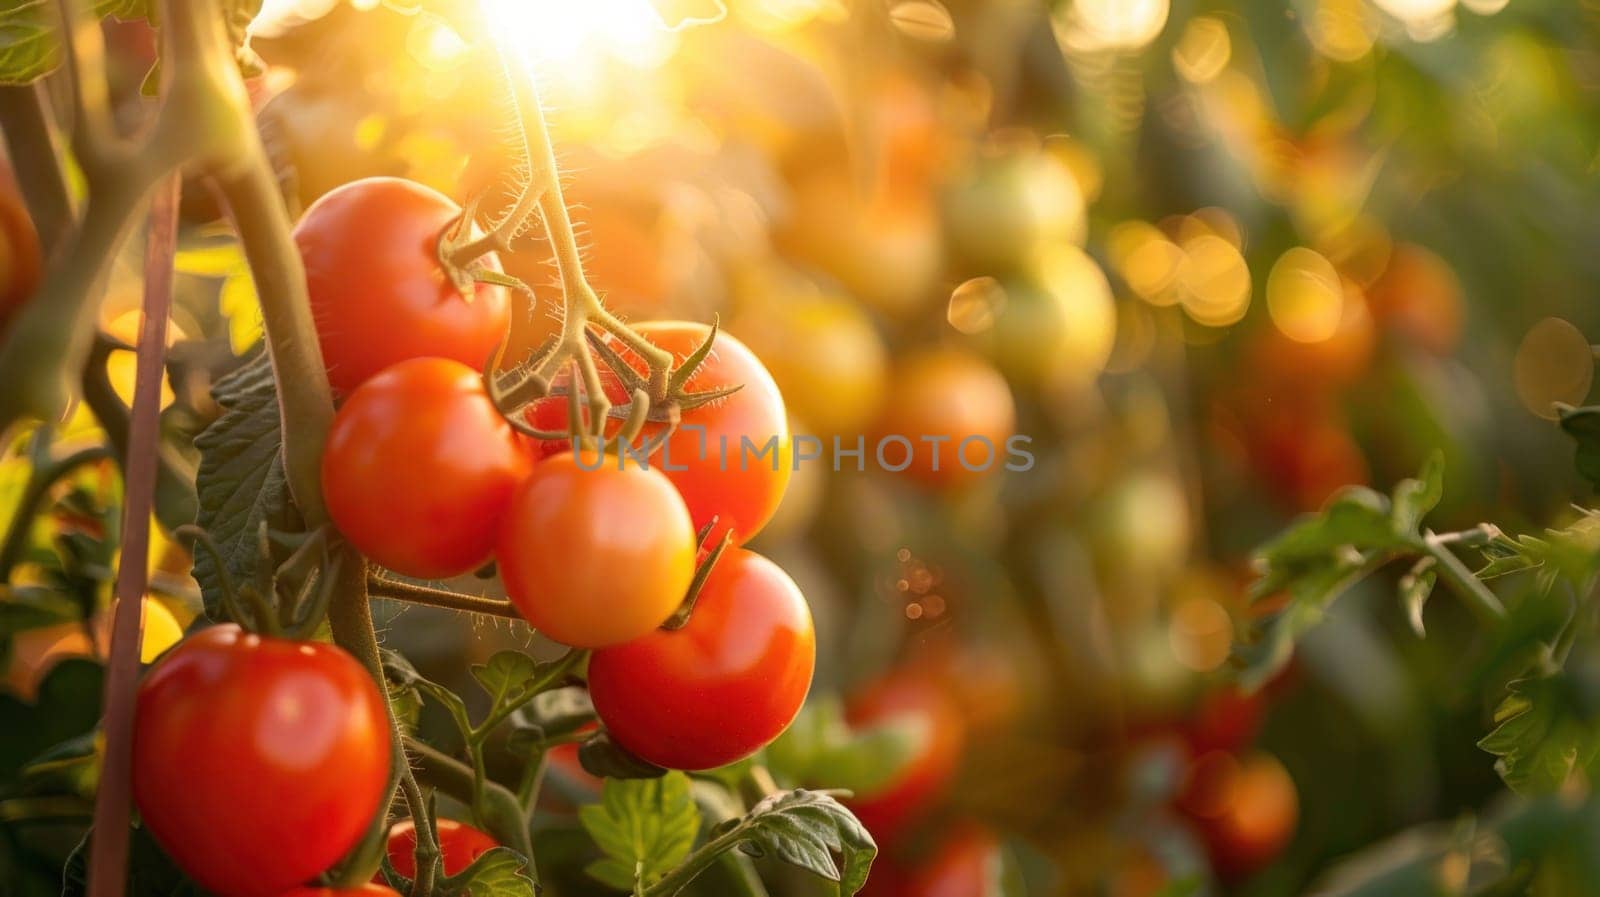 A tomato plant with a red tomato hanging from it.